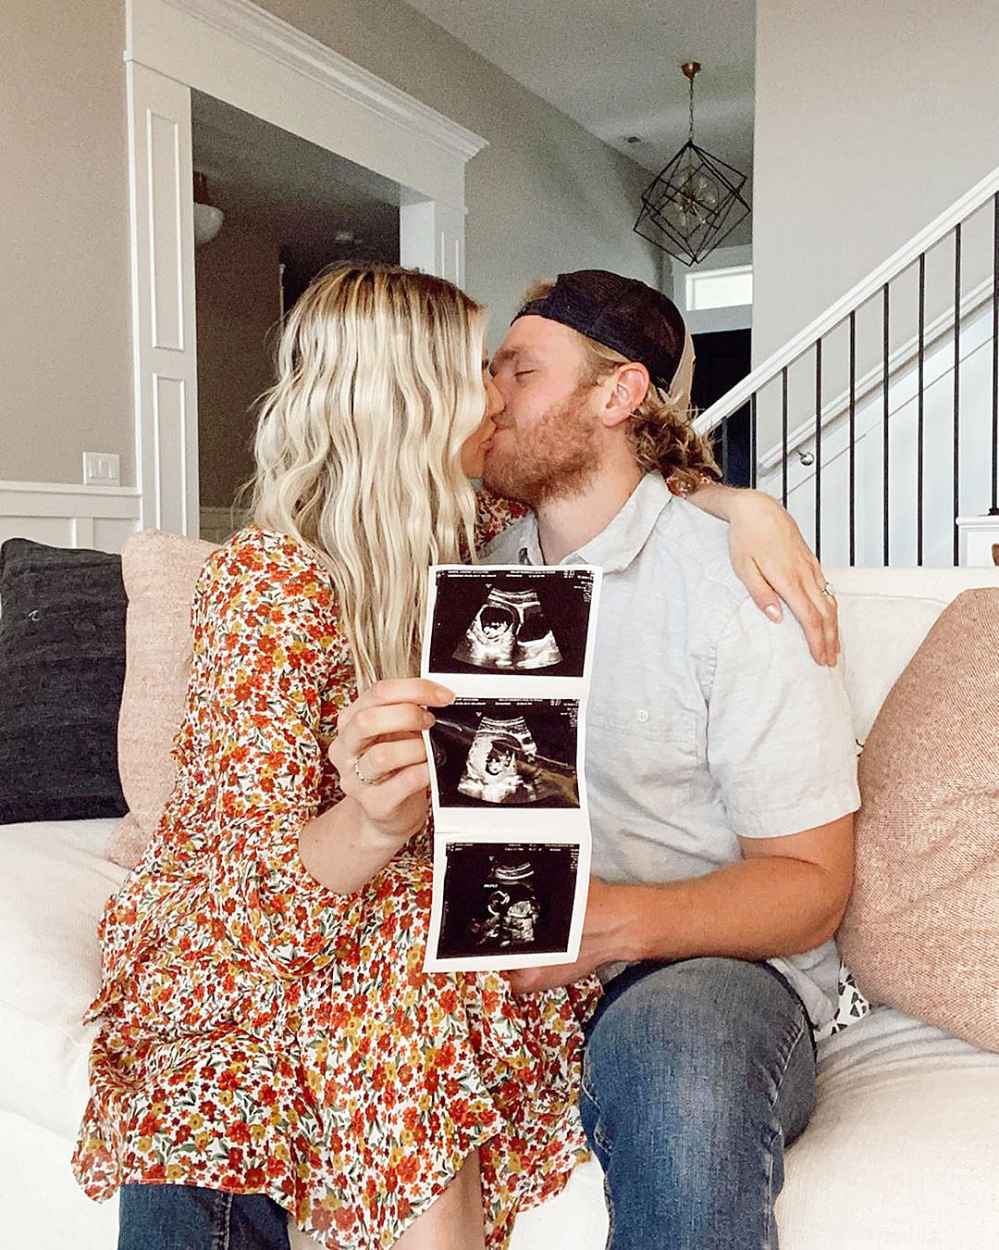 DWTS’ Lindsay Arnold Is Pregnant, Expecting Her 1st Child With Husband ...